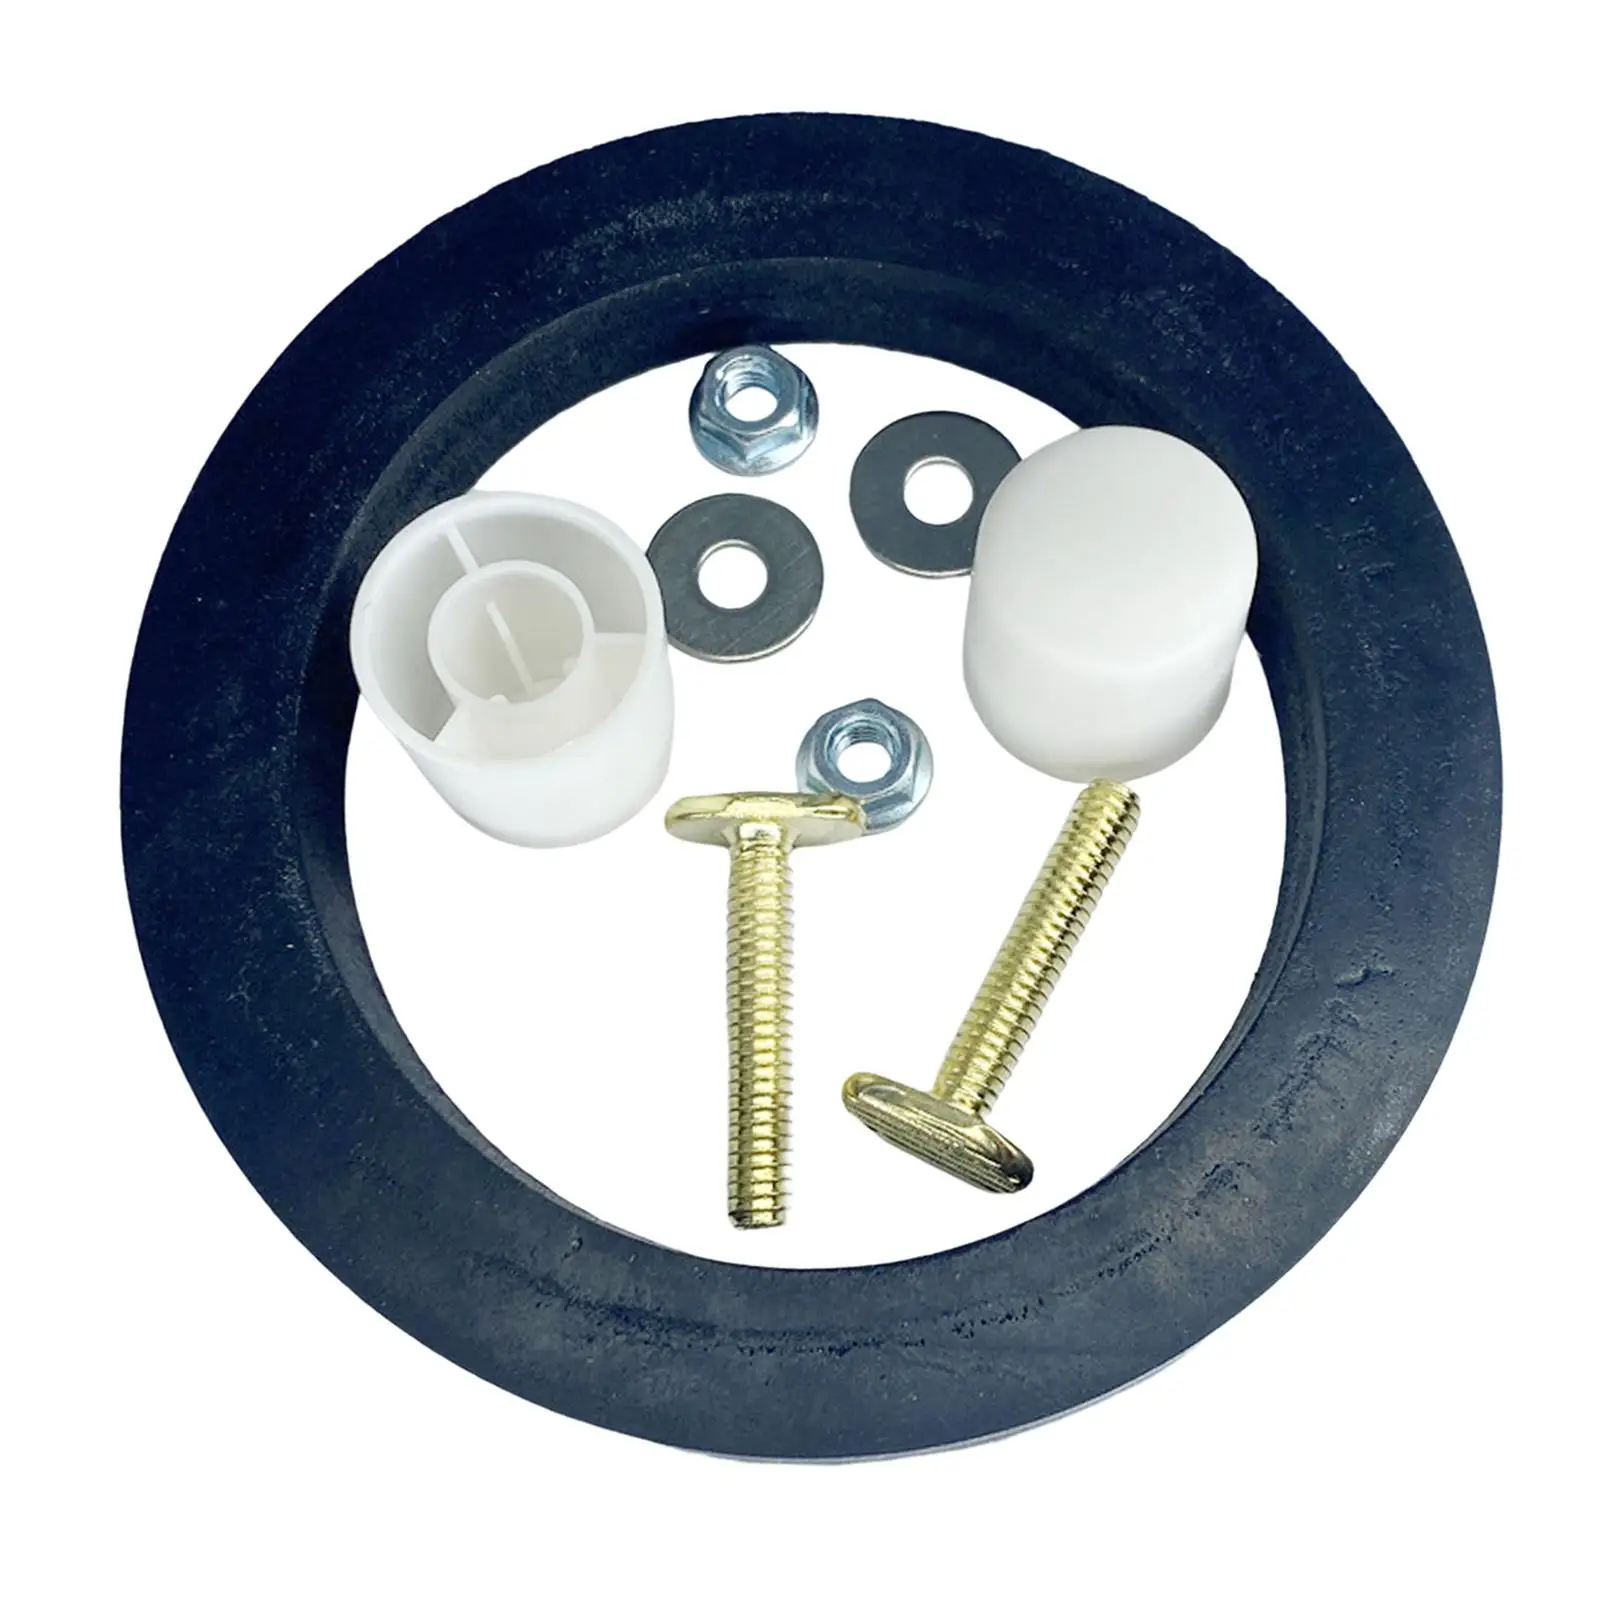 Seal Gasket of RV Toilet for Toilet Simple Installation Flush Ball Seal